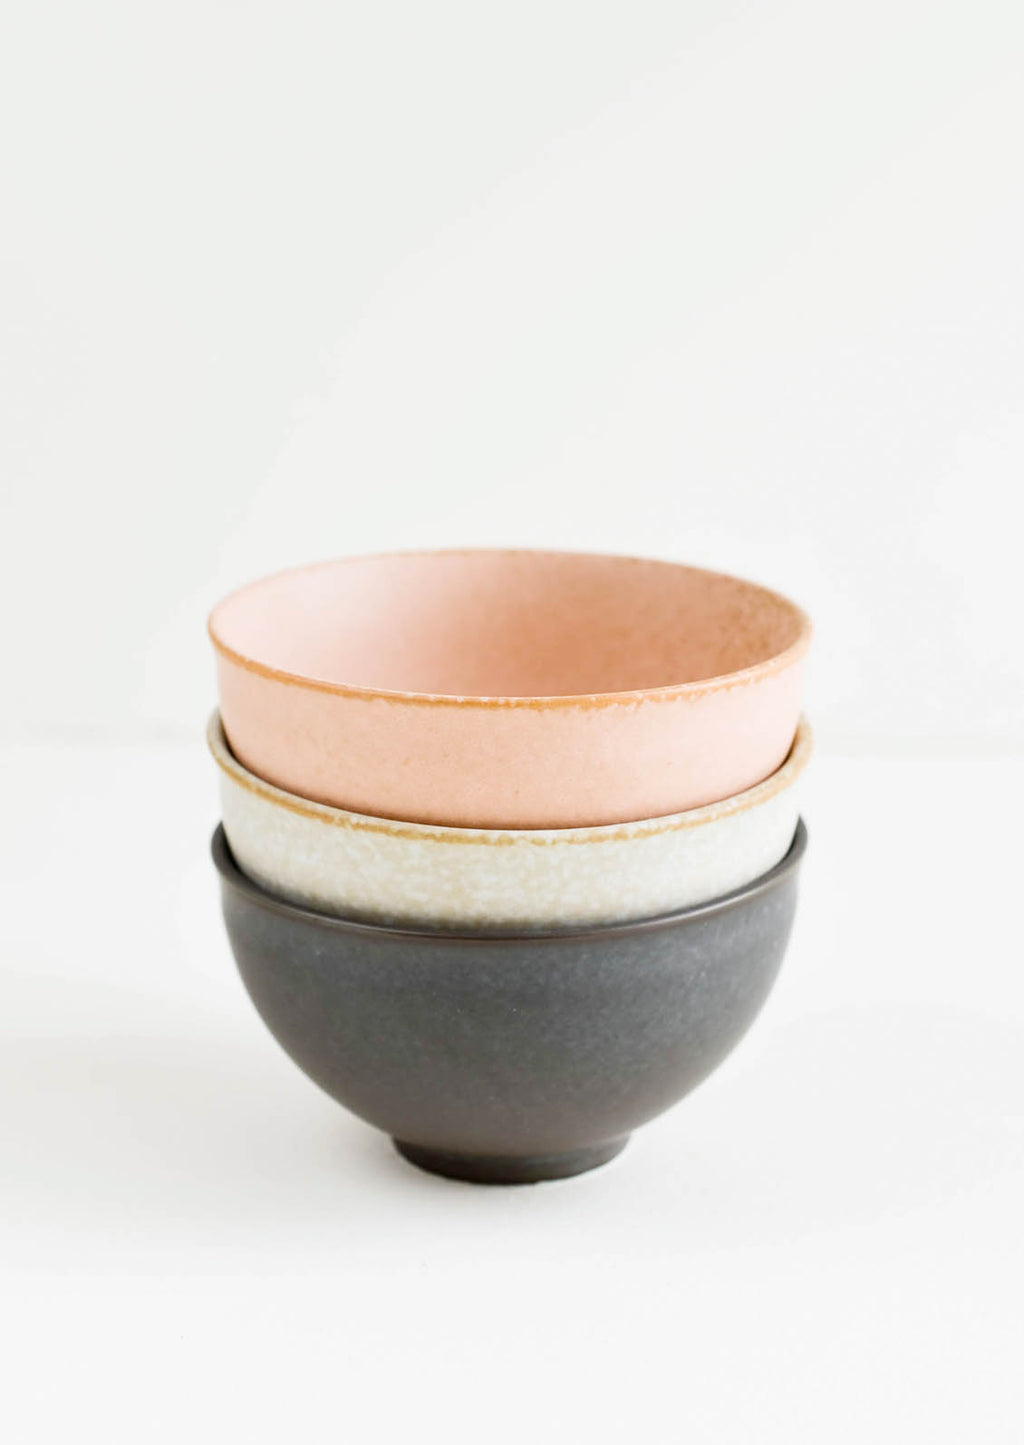 4: Stacked Ceramic Bowls in Grey, Peach & Black - LEIF